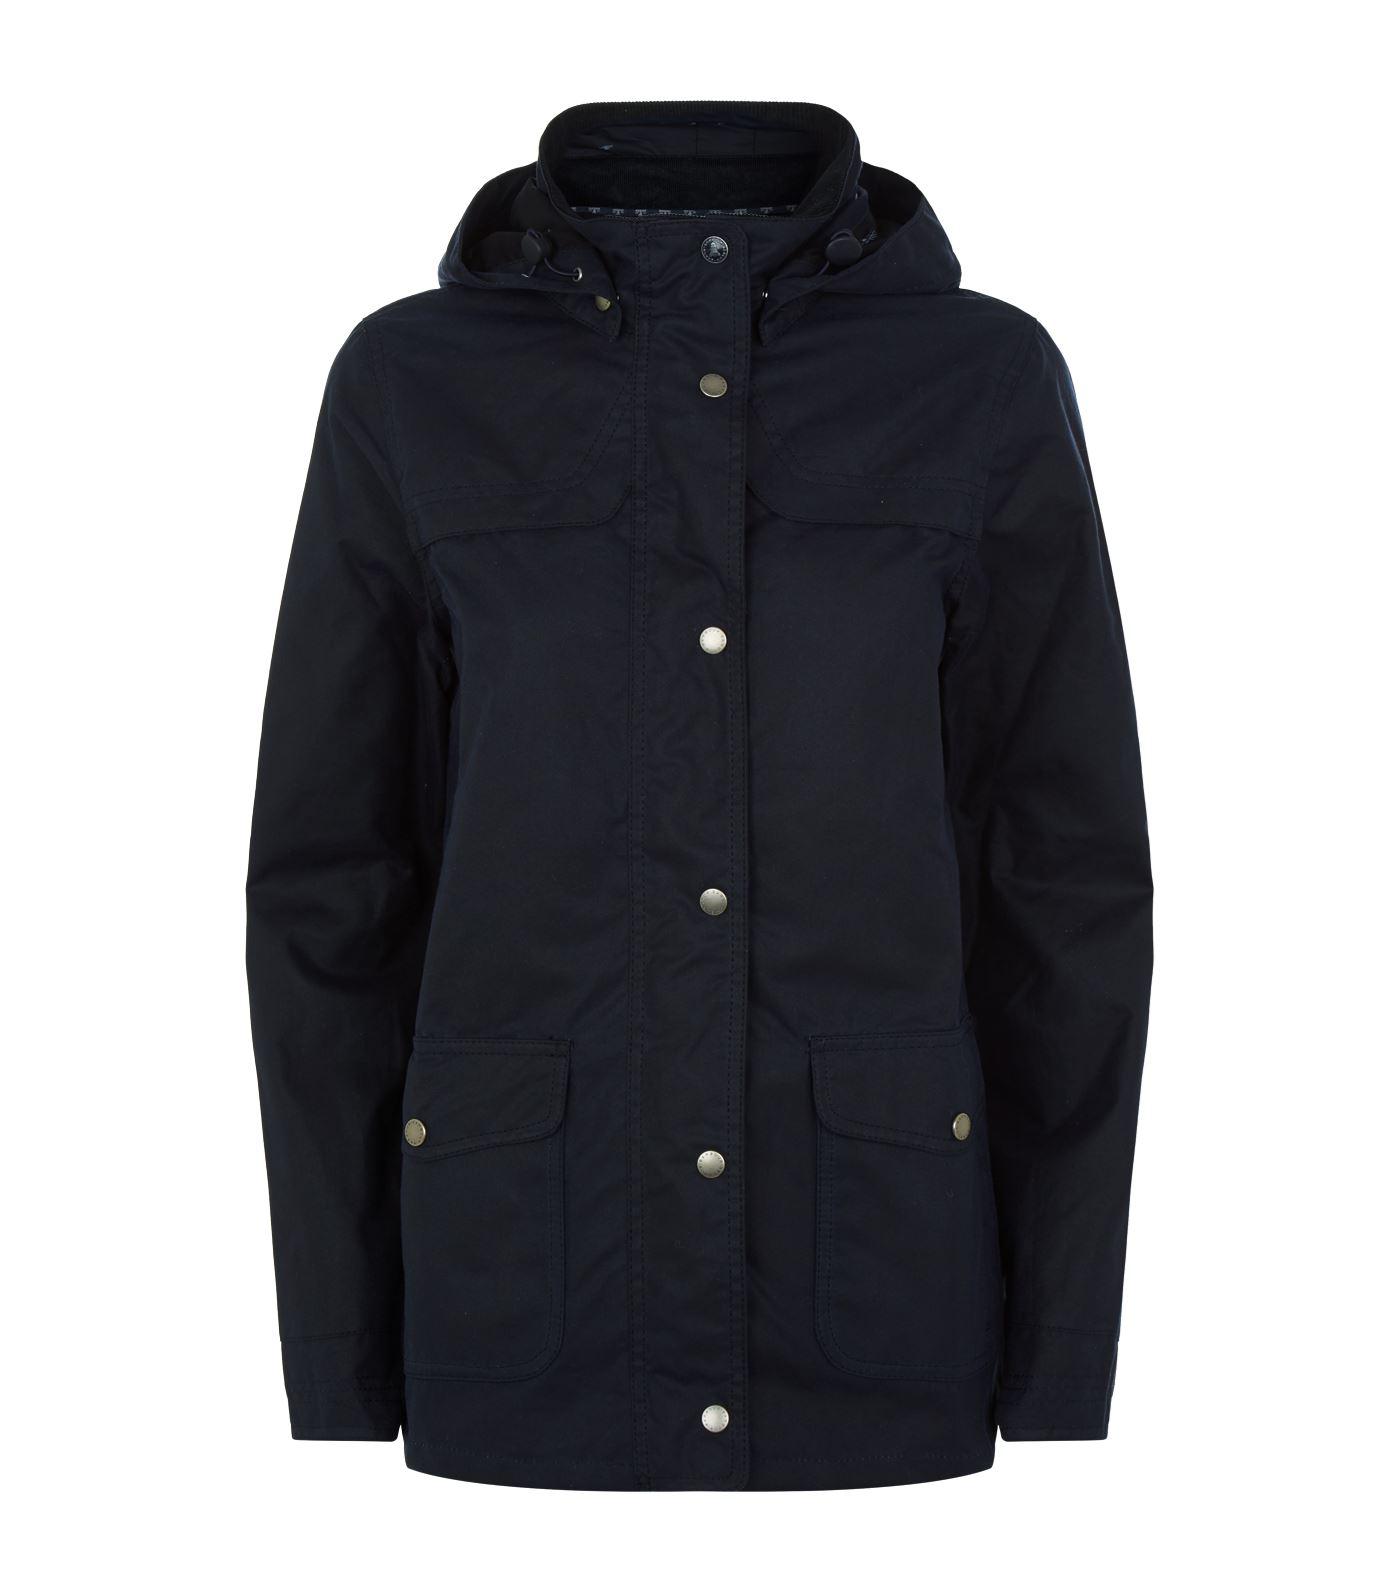 Barbour Watergate Waxed Cotton Jacket Top Sellers, SAVE 58%.